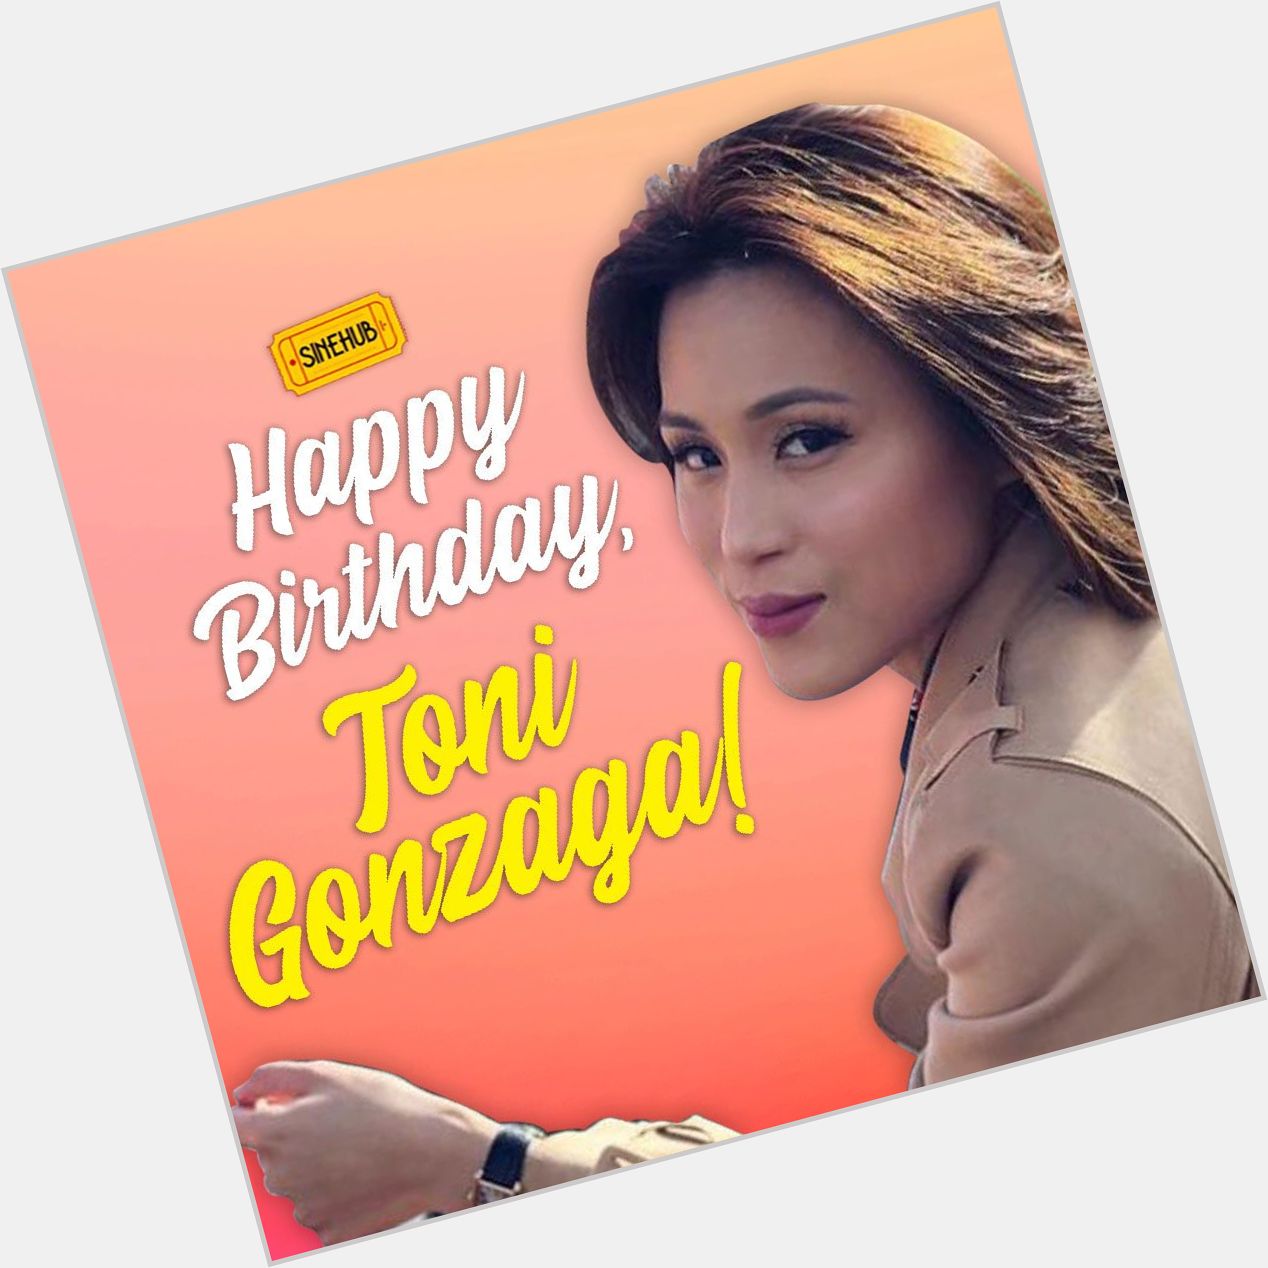 Wishing a happy birthday to the one and only Toni Gonzaga!     